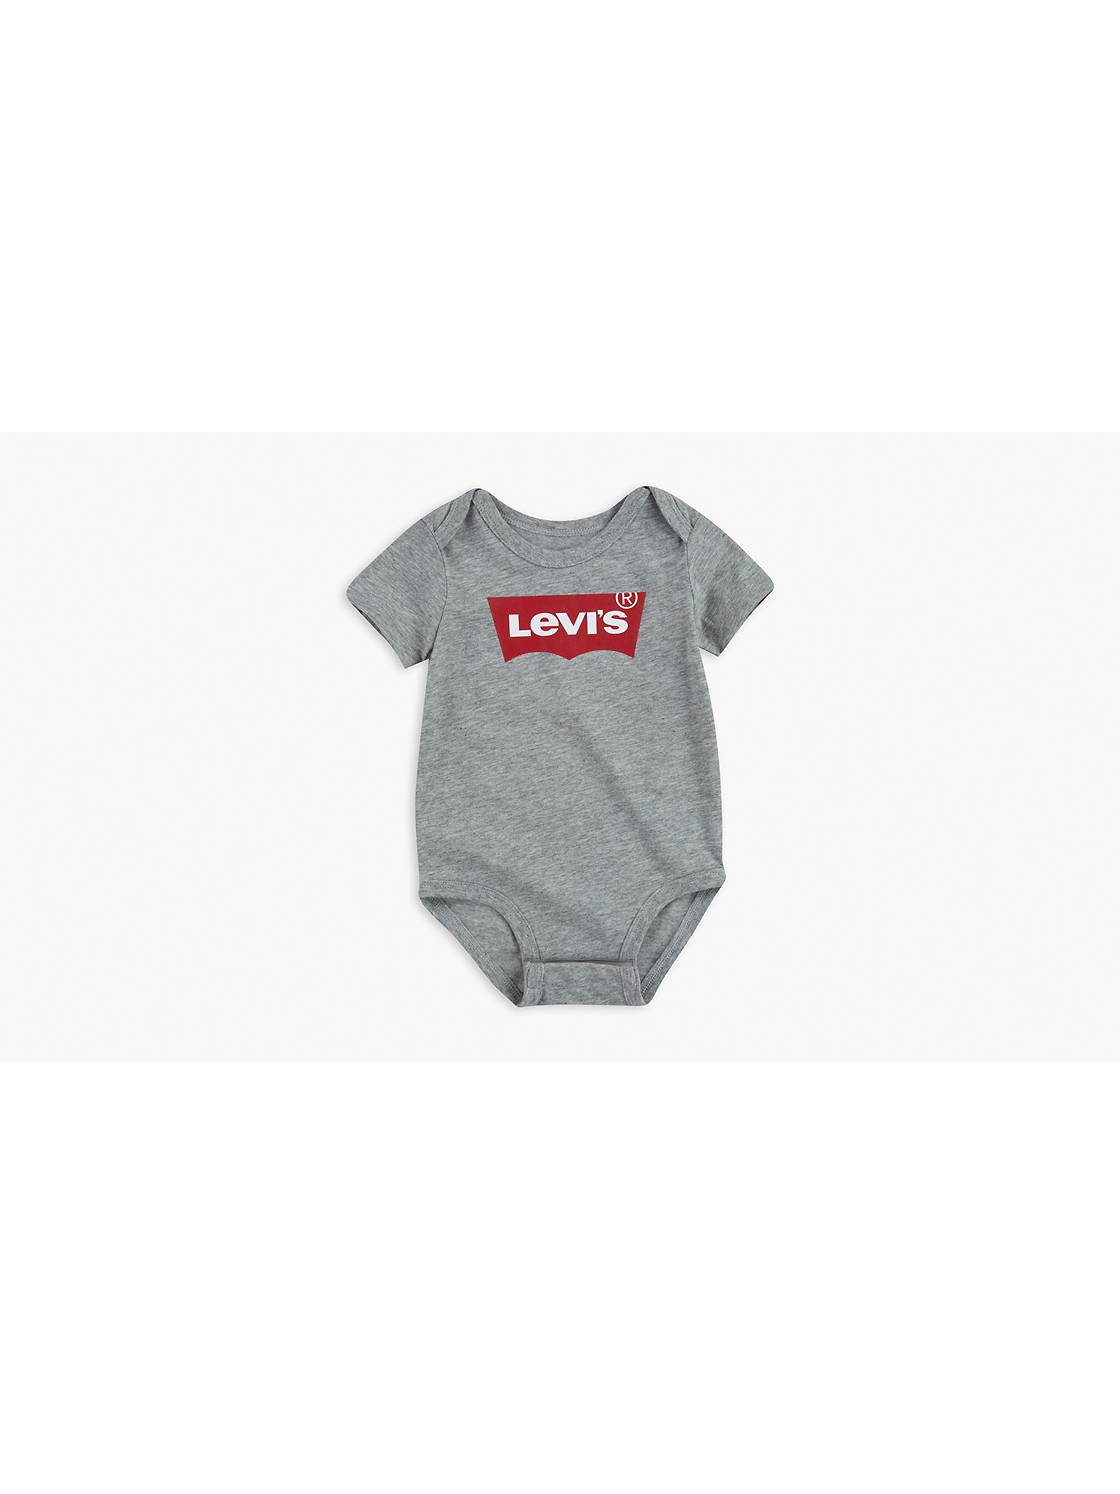 Baby Clothes - Onesies & 2-3 Piece Sets for 6-24 Months | Levi's®